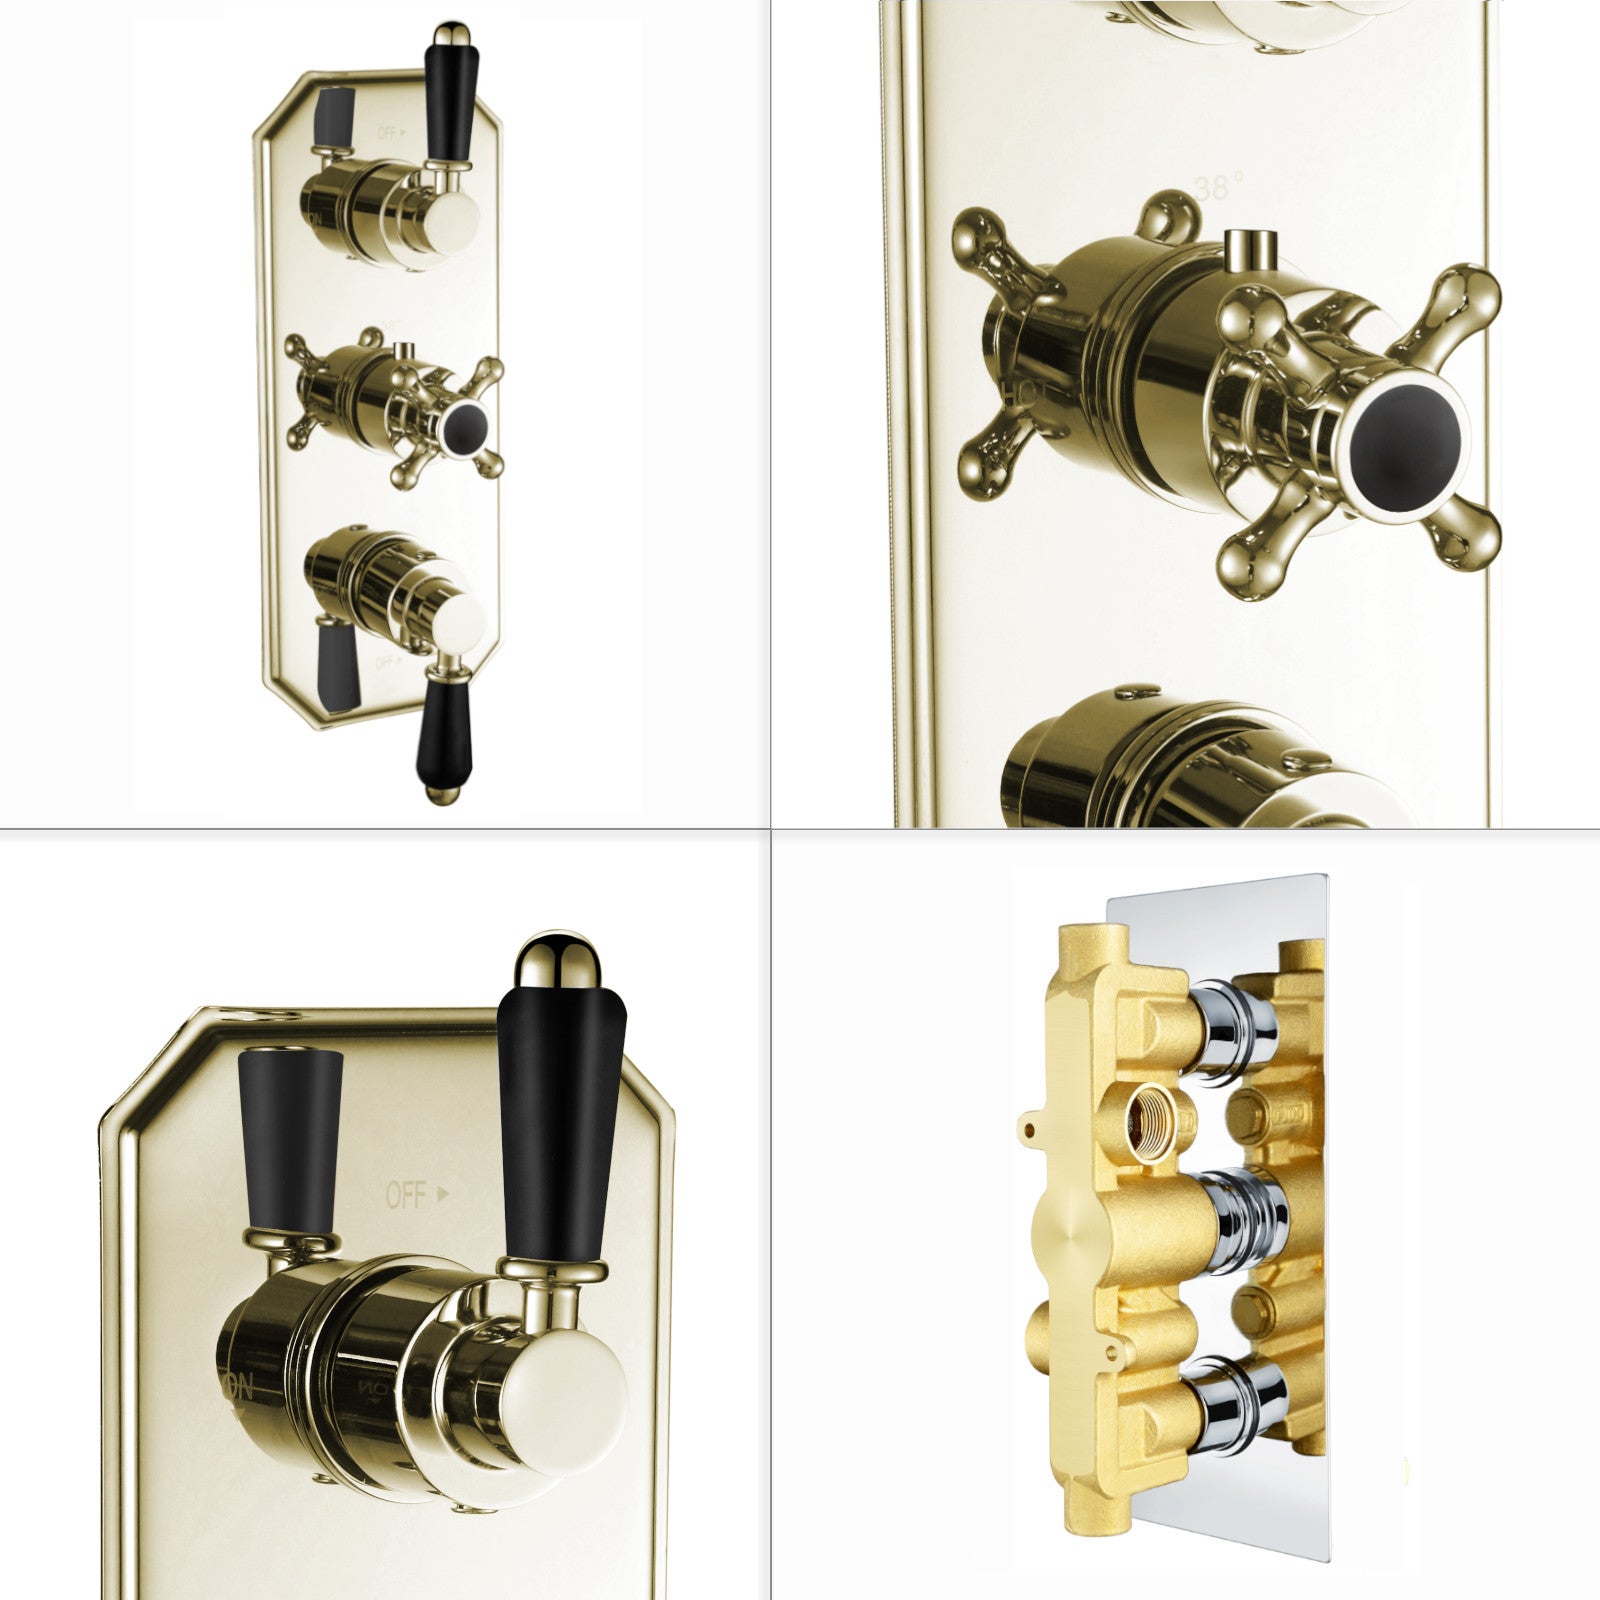 Regent traditional crosshead and black lever concealed thermostatic triple shower valve with 2 outlets - English gold - Showers